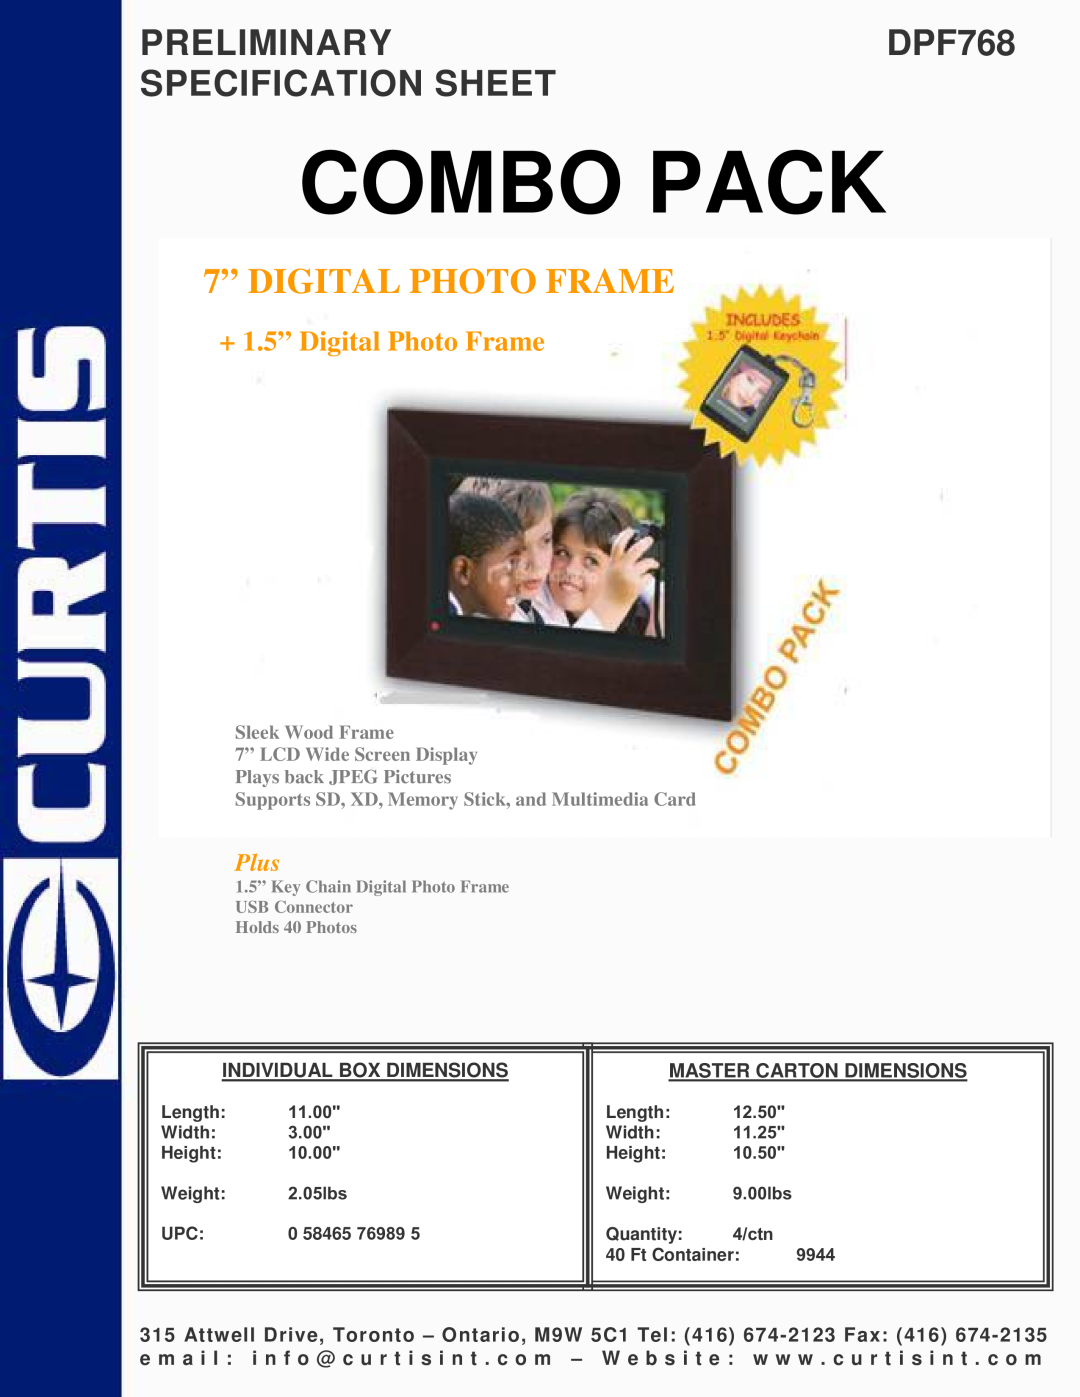 Curtis specifications Combo Pack, PRELIMINARYDPF768 SPECIFICATION SHEET, 7” DIGITAL PHOTO FRAME, Plus, Sleek Wood Frame 